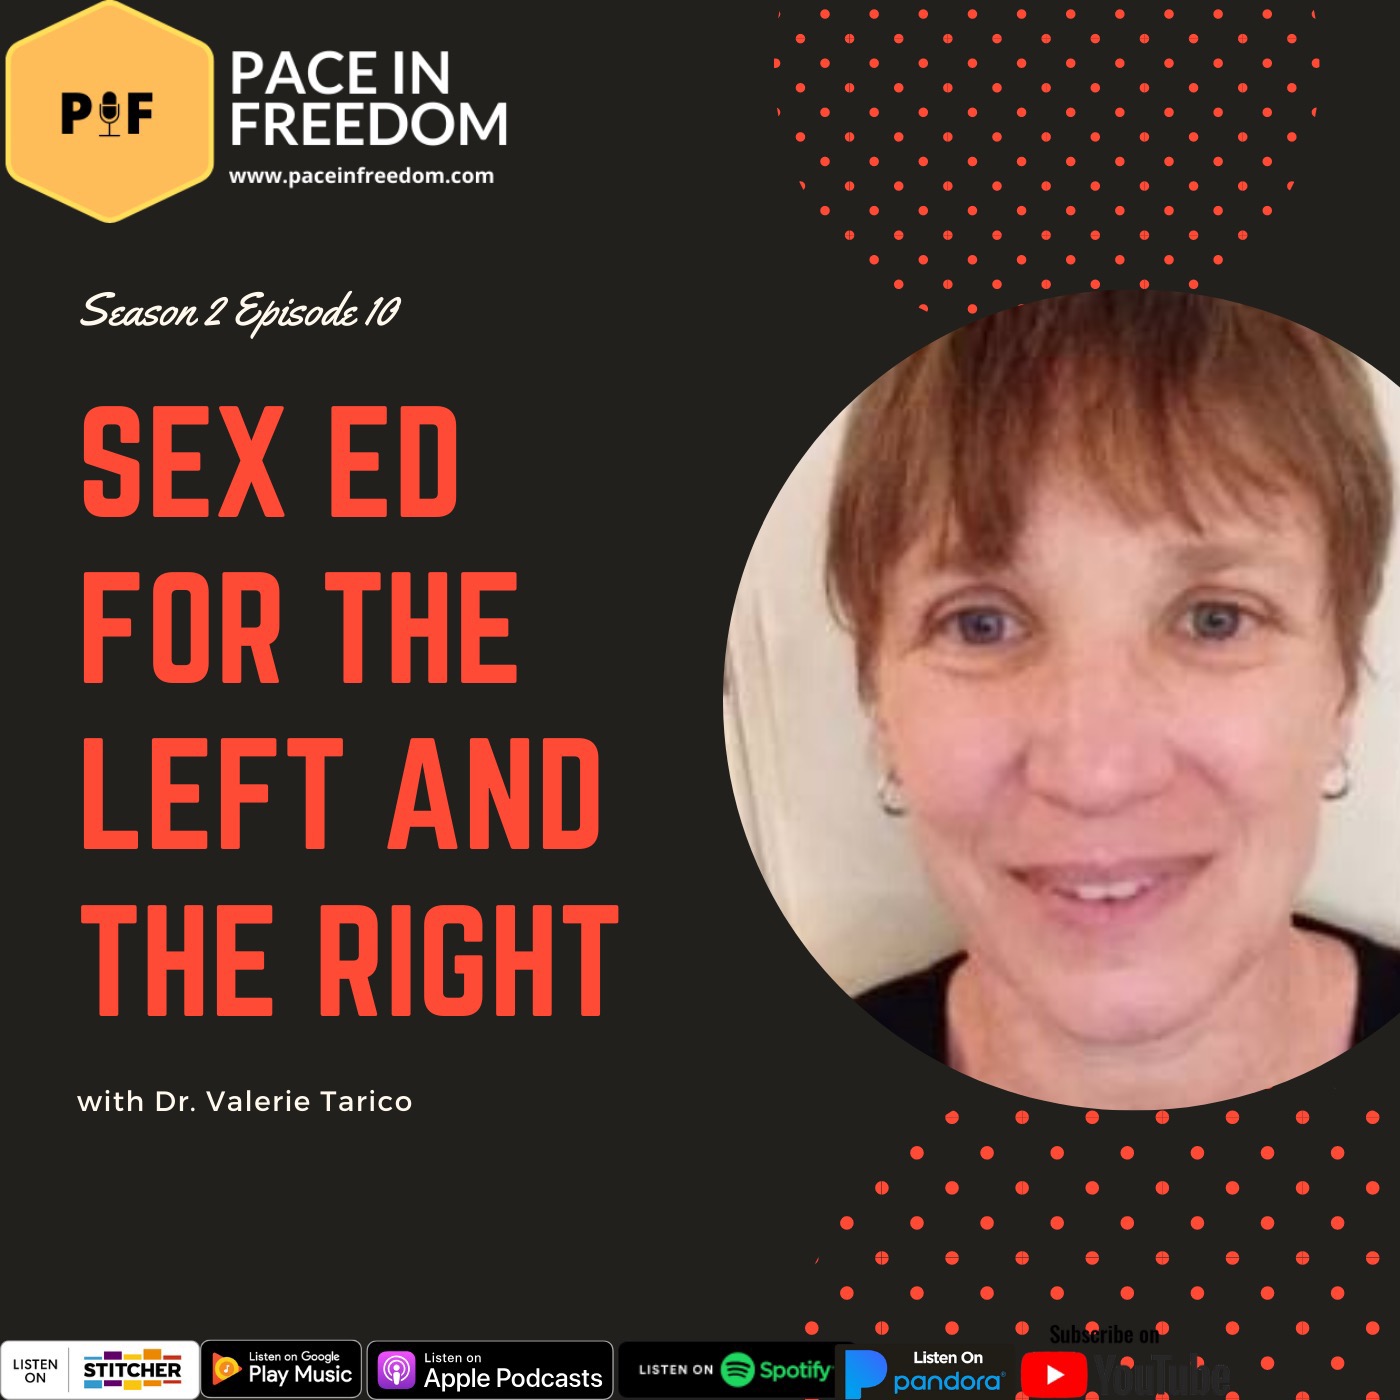 EP10: Sex Ed For The Left and The Right w/ Dr. Valerie Tarico